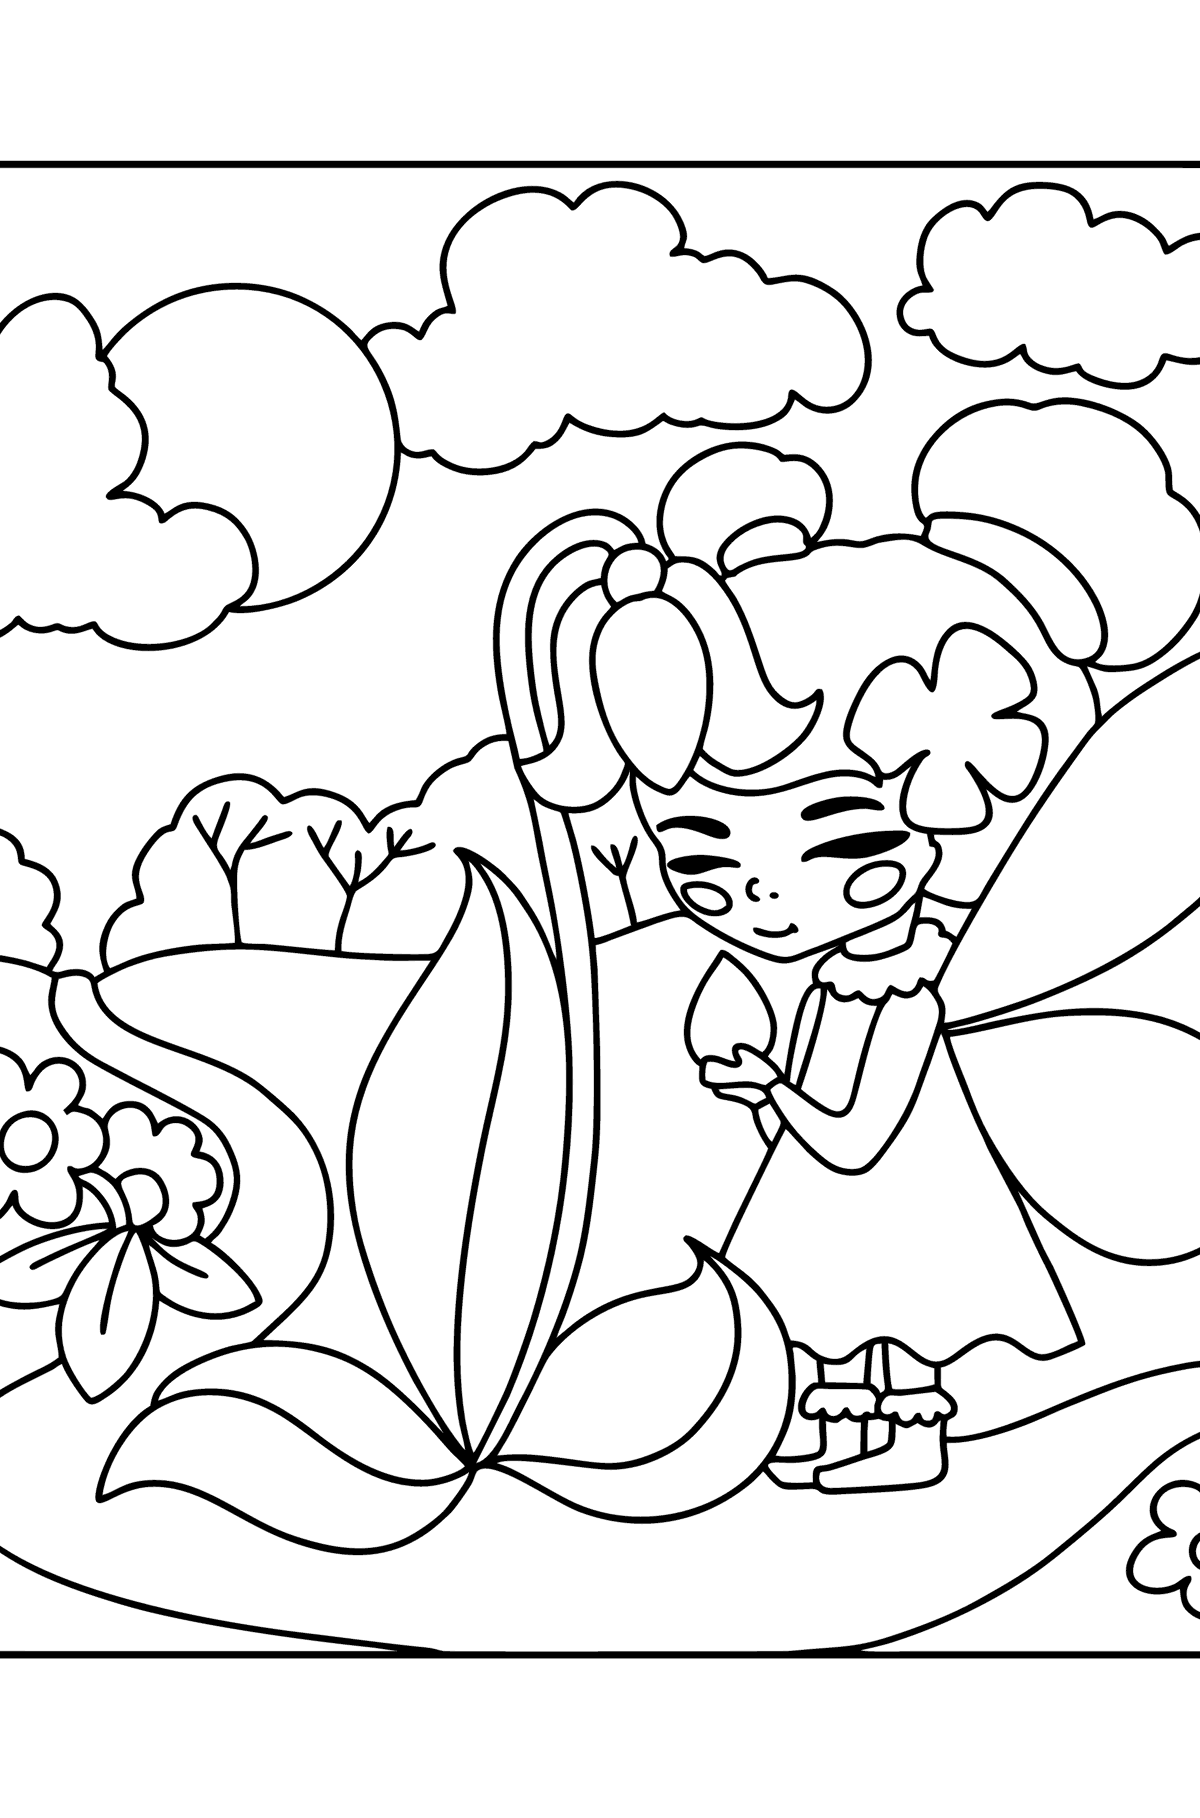 Fairy on a forest path coloring page - Coloring Pages for Kids